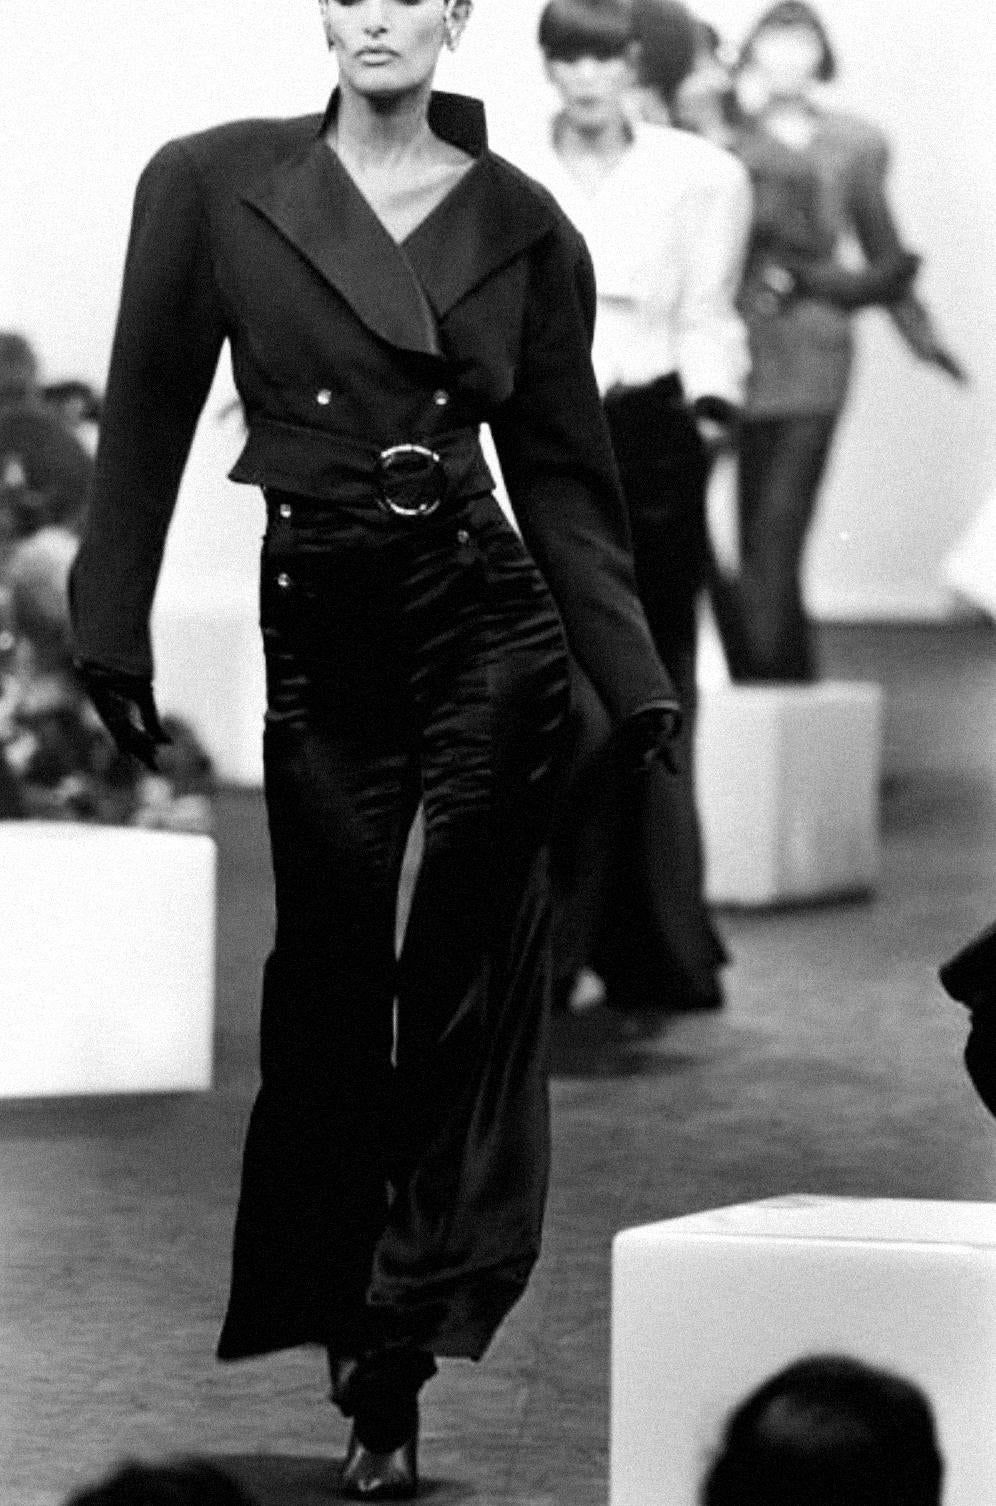 
Very rare dramatic Thierry Mugler jacket, FW 1985 Collection. Stunning Collectors piece, well documented on the '85 Runway Show.
You put it on and it creates this amazing structured shape - truly wearable art and extremely well made and designed.